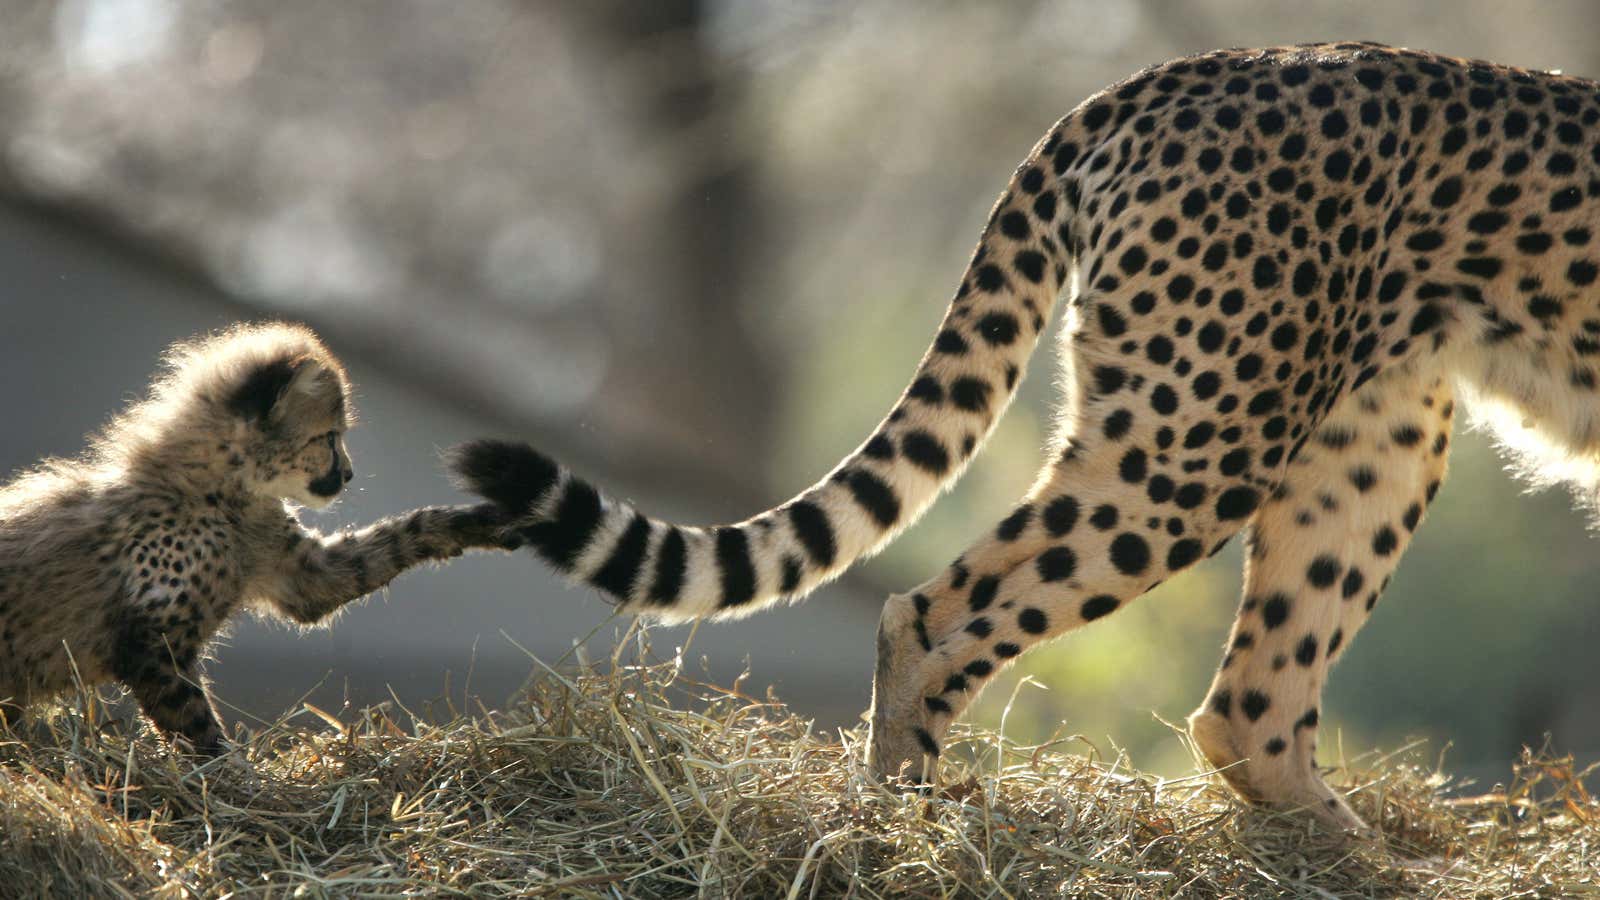 “The majority of female cheetahs in Serengeti never manage to raise a single cub.”